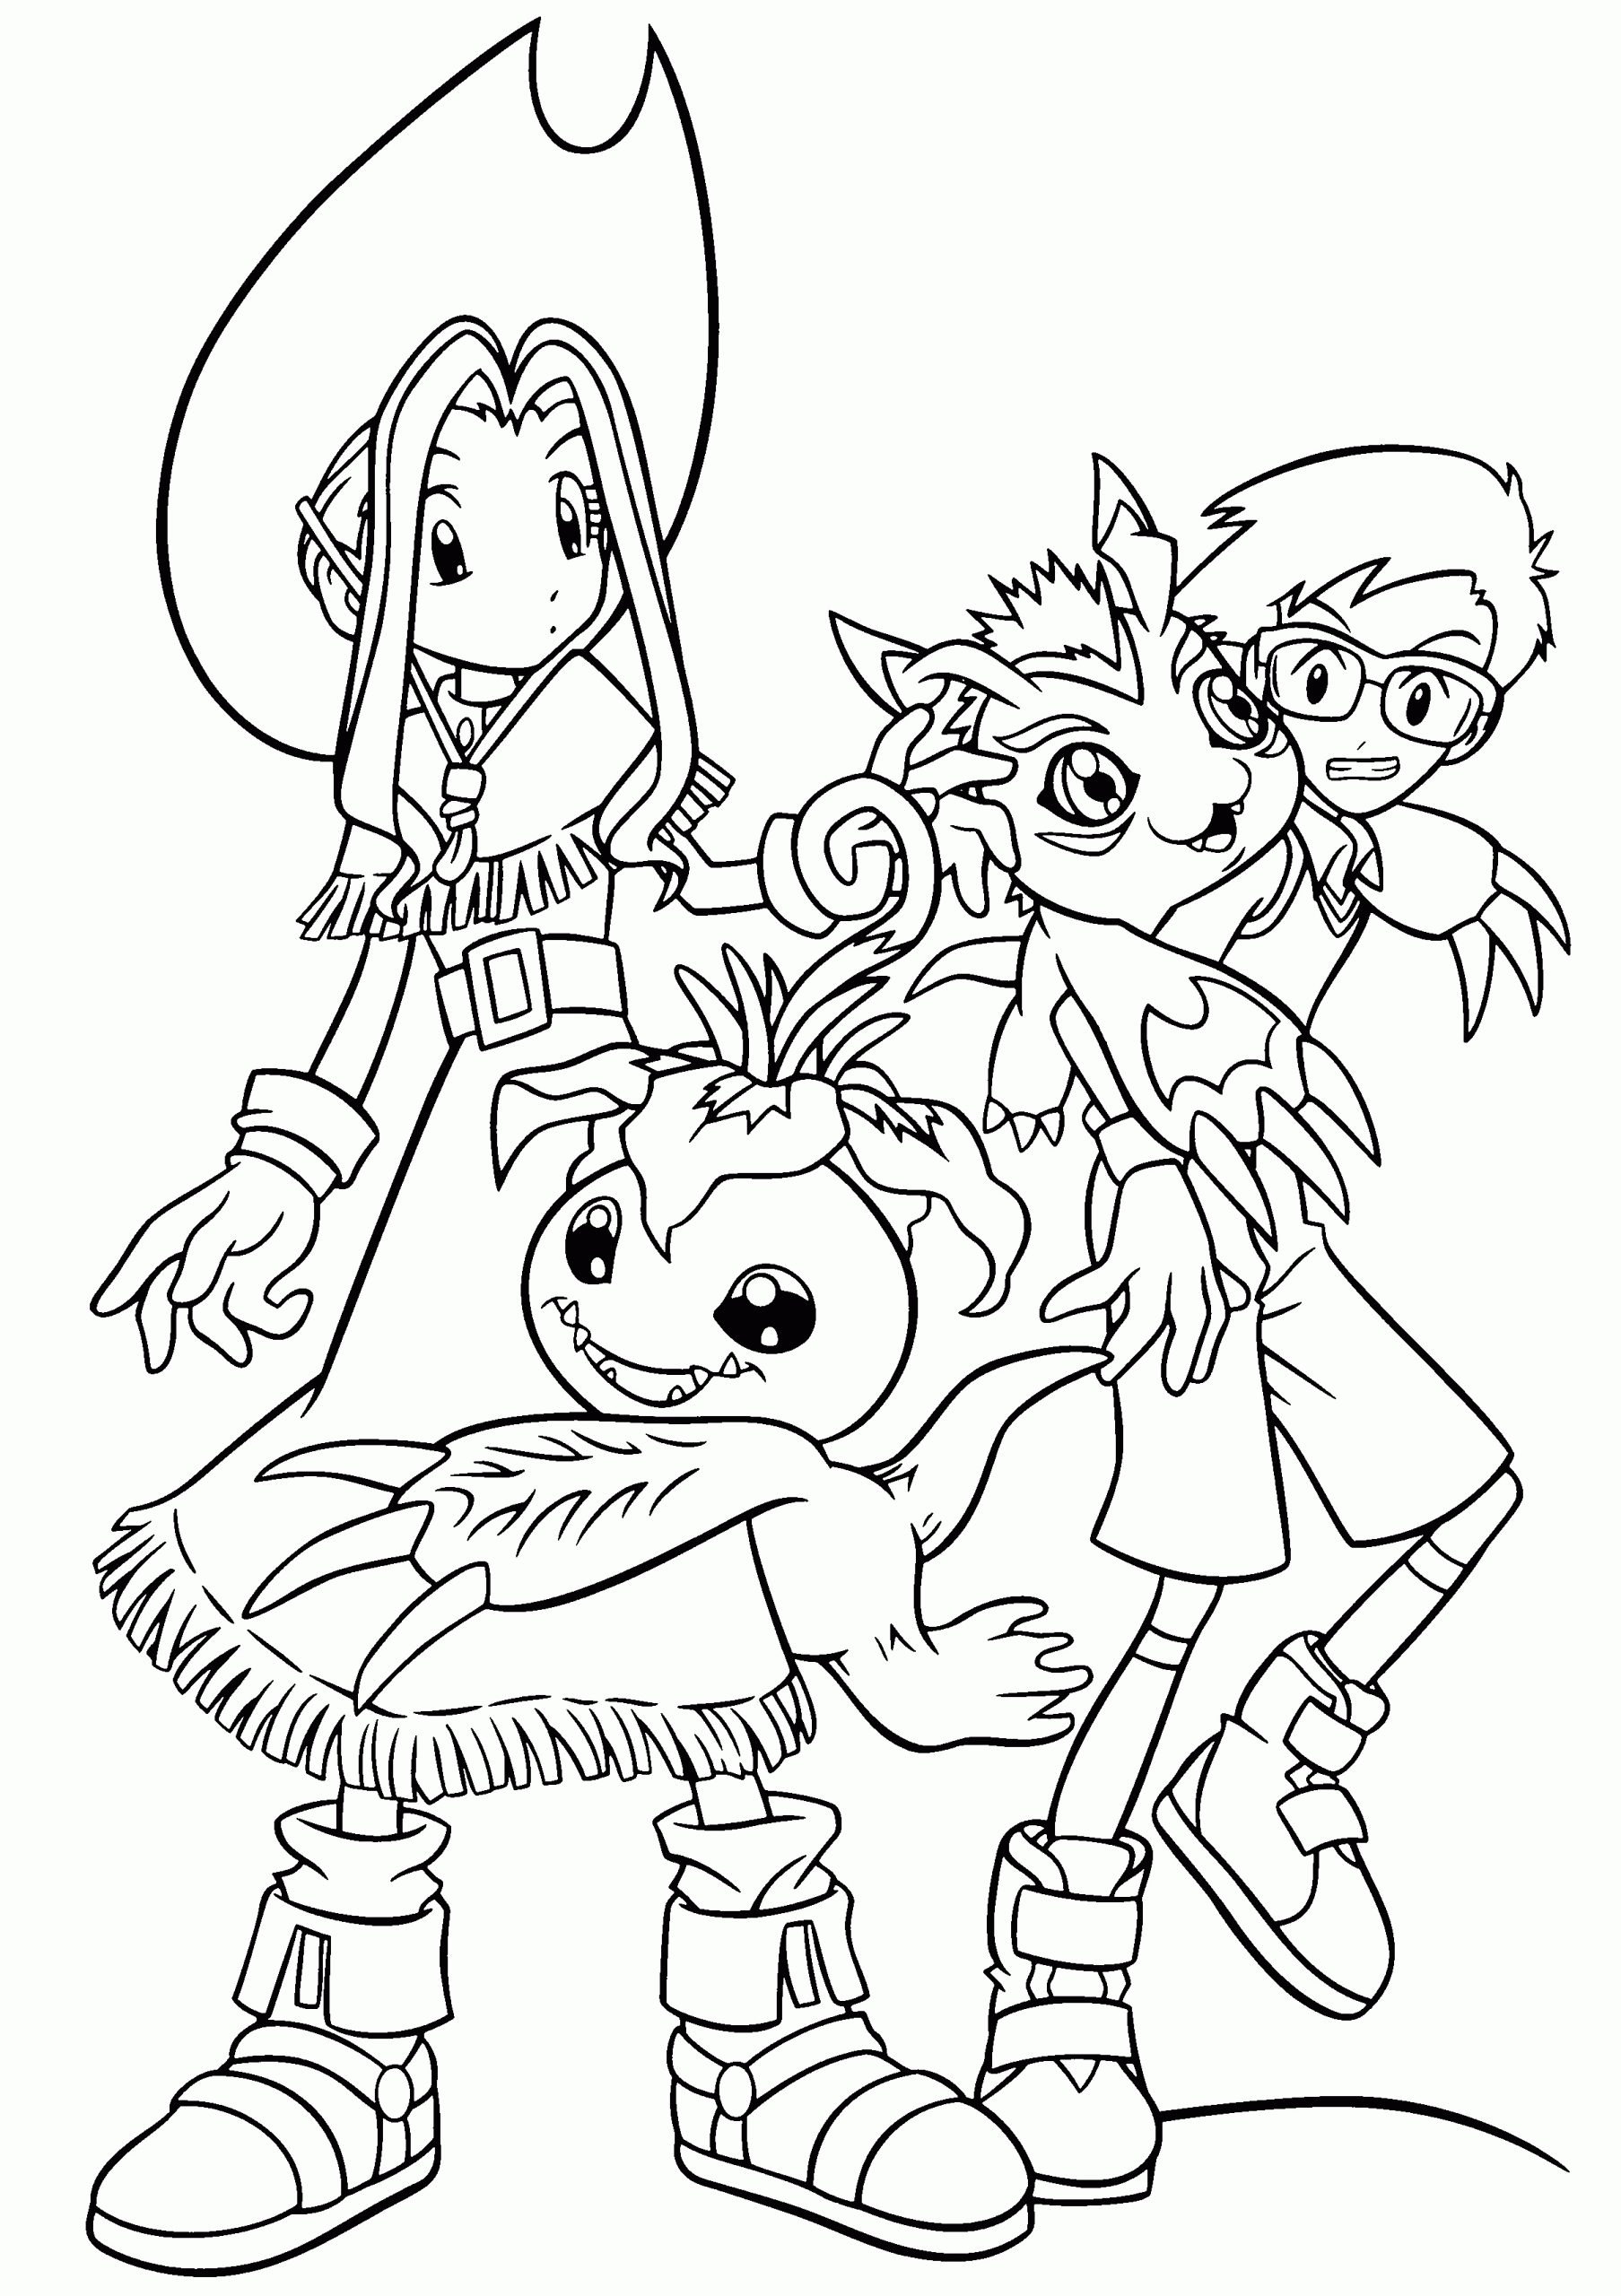 Children Coloring Books
 Free Printable Digimon Coloring Pages For Kids